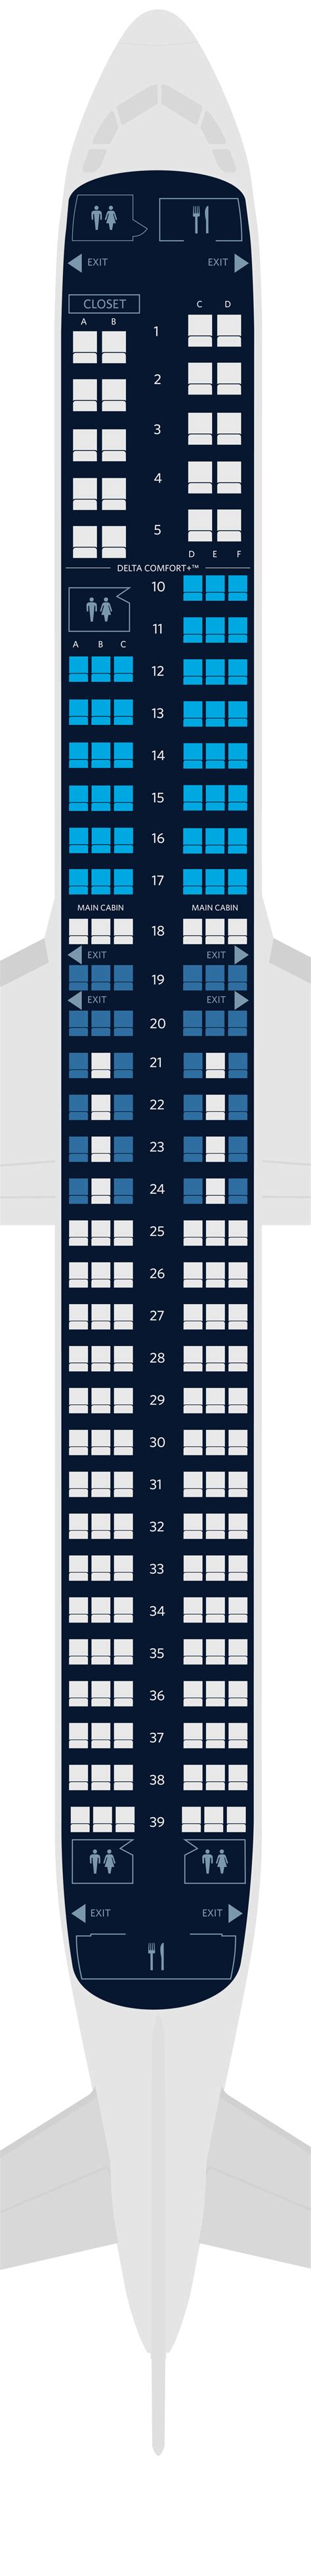 Airbus A Neo Aa Seat Map Image To U